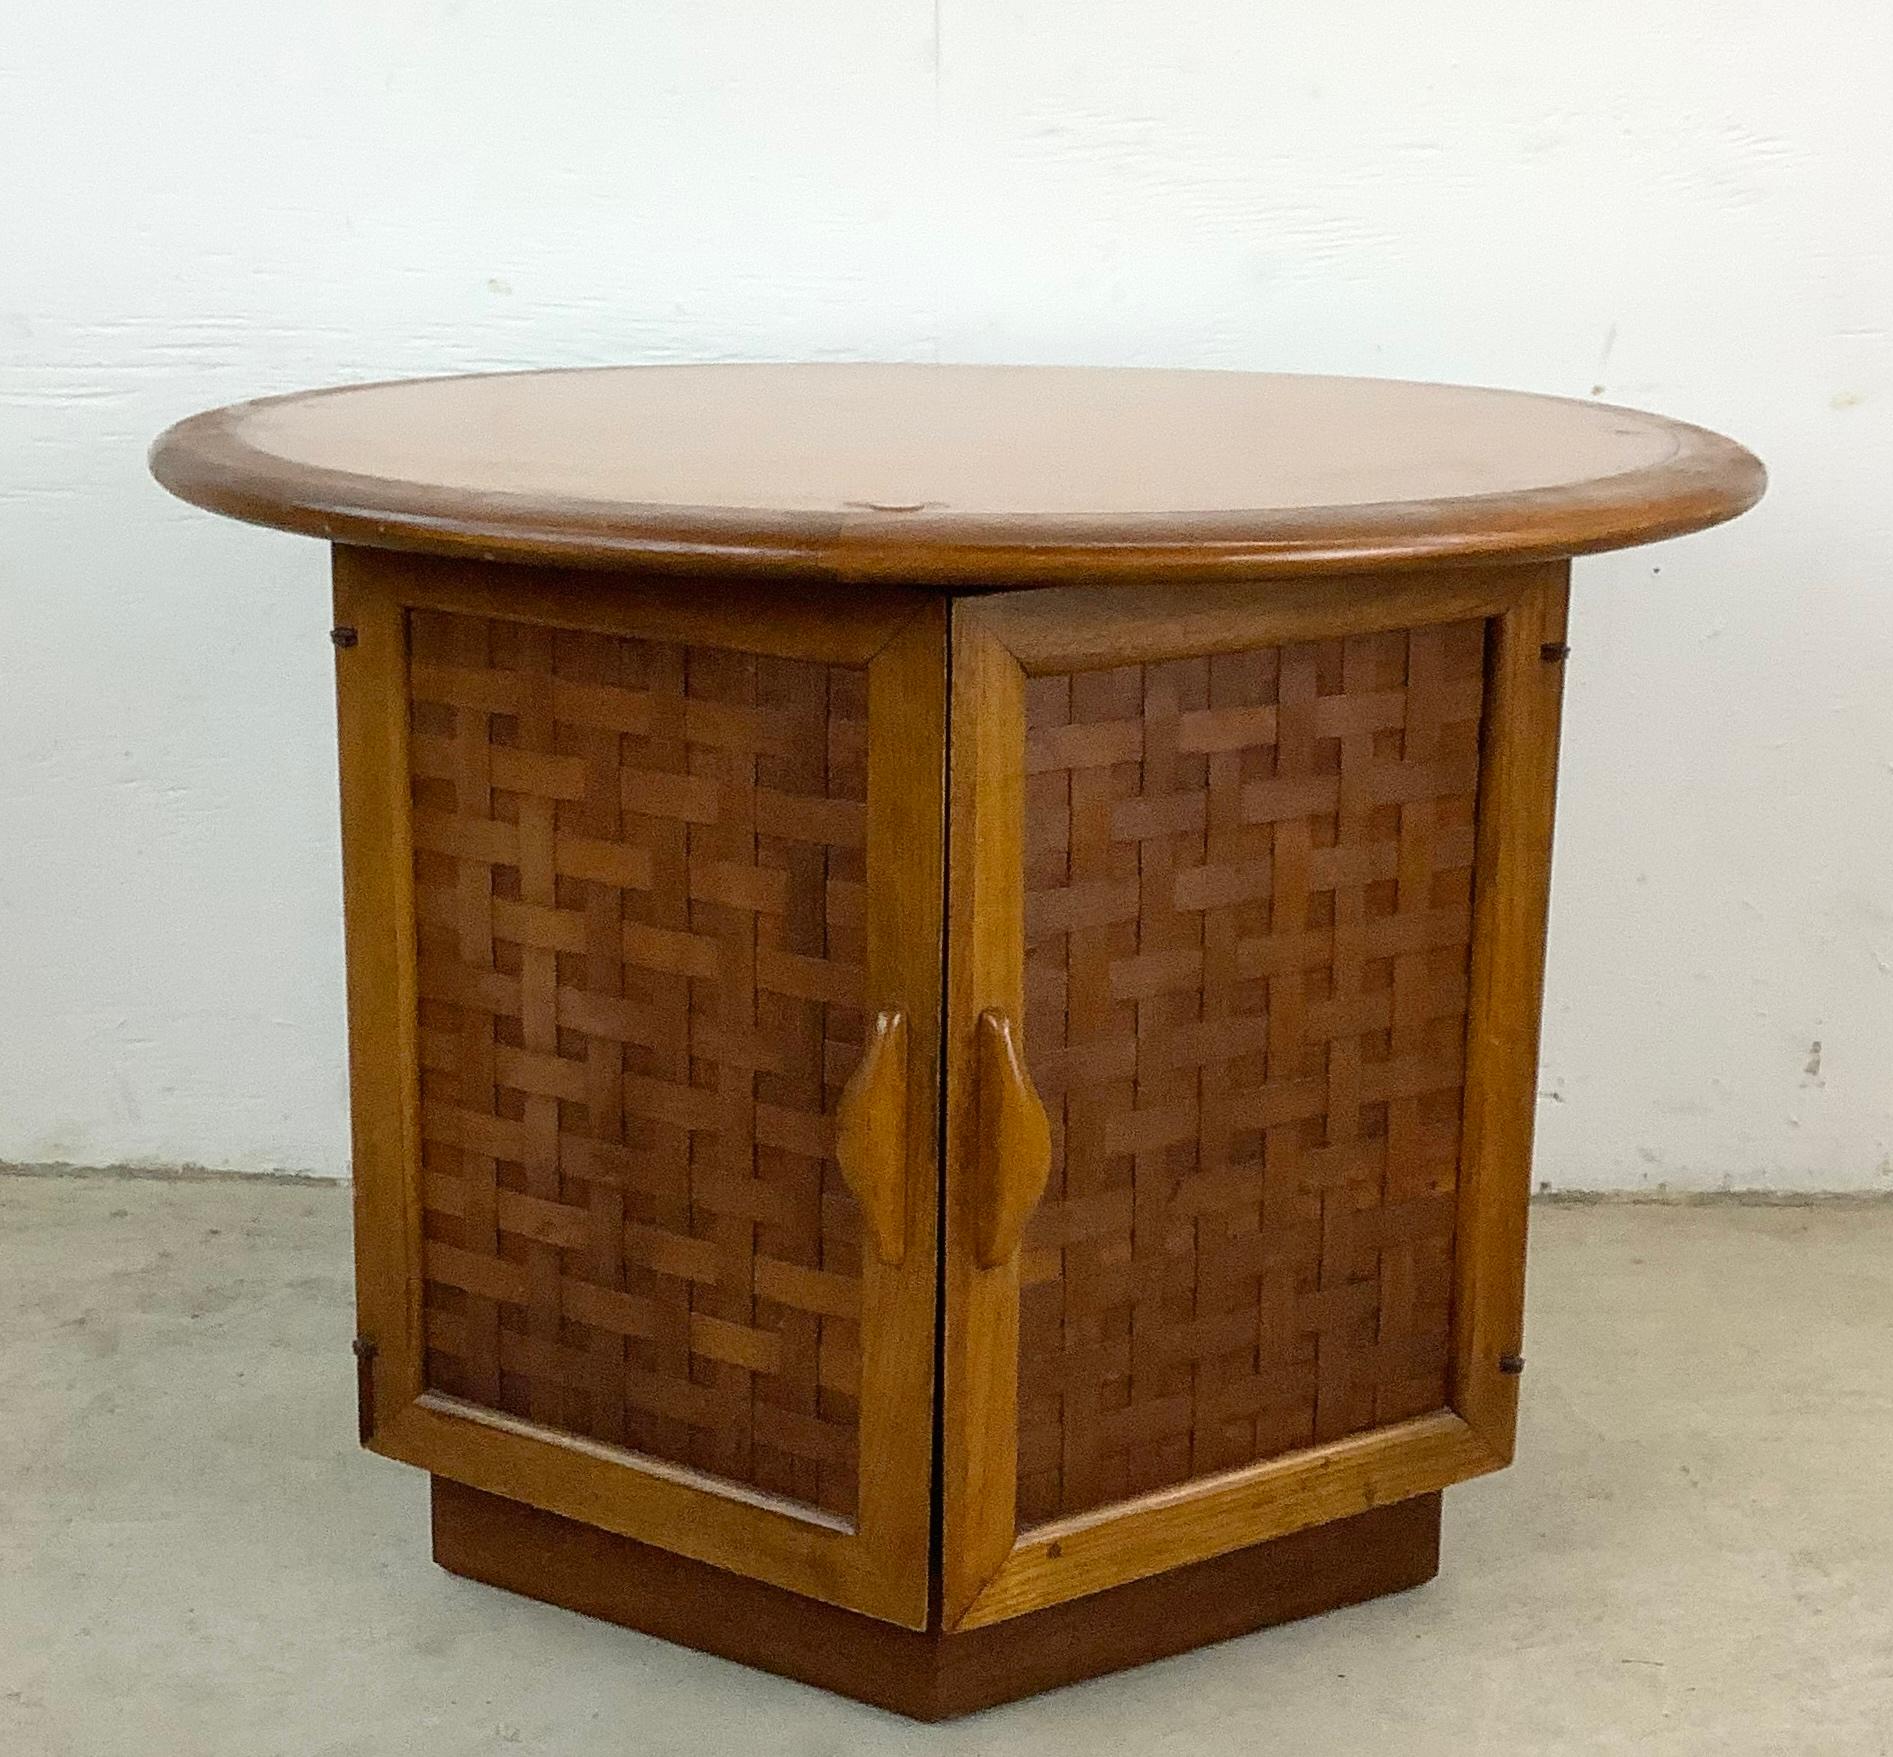 Immerse yourself in the charm of mid-century modern design with this Vintage Lane Perception Side Table. This exquisite piece, with its unique basketweave door fronts and hexagon cubby storage, is a marvel of design and functionality.

The side